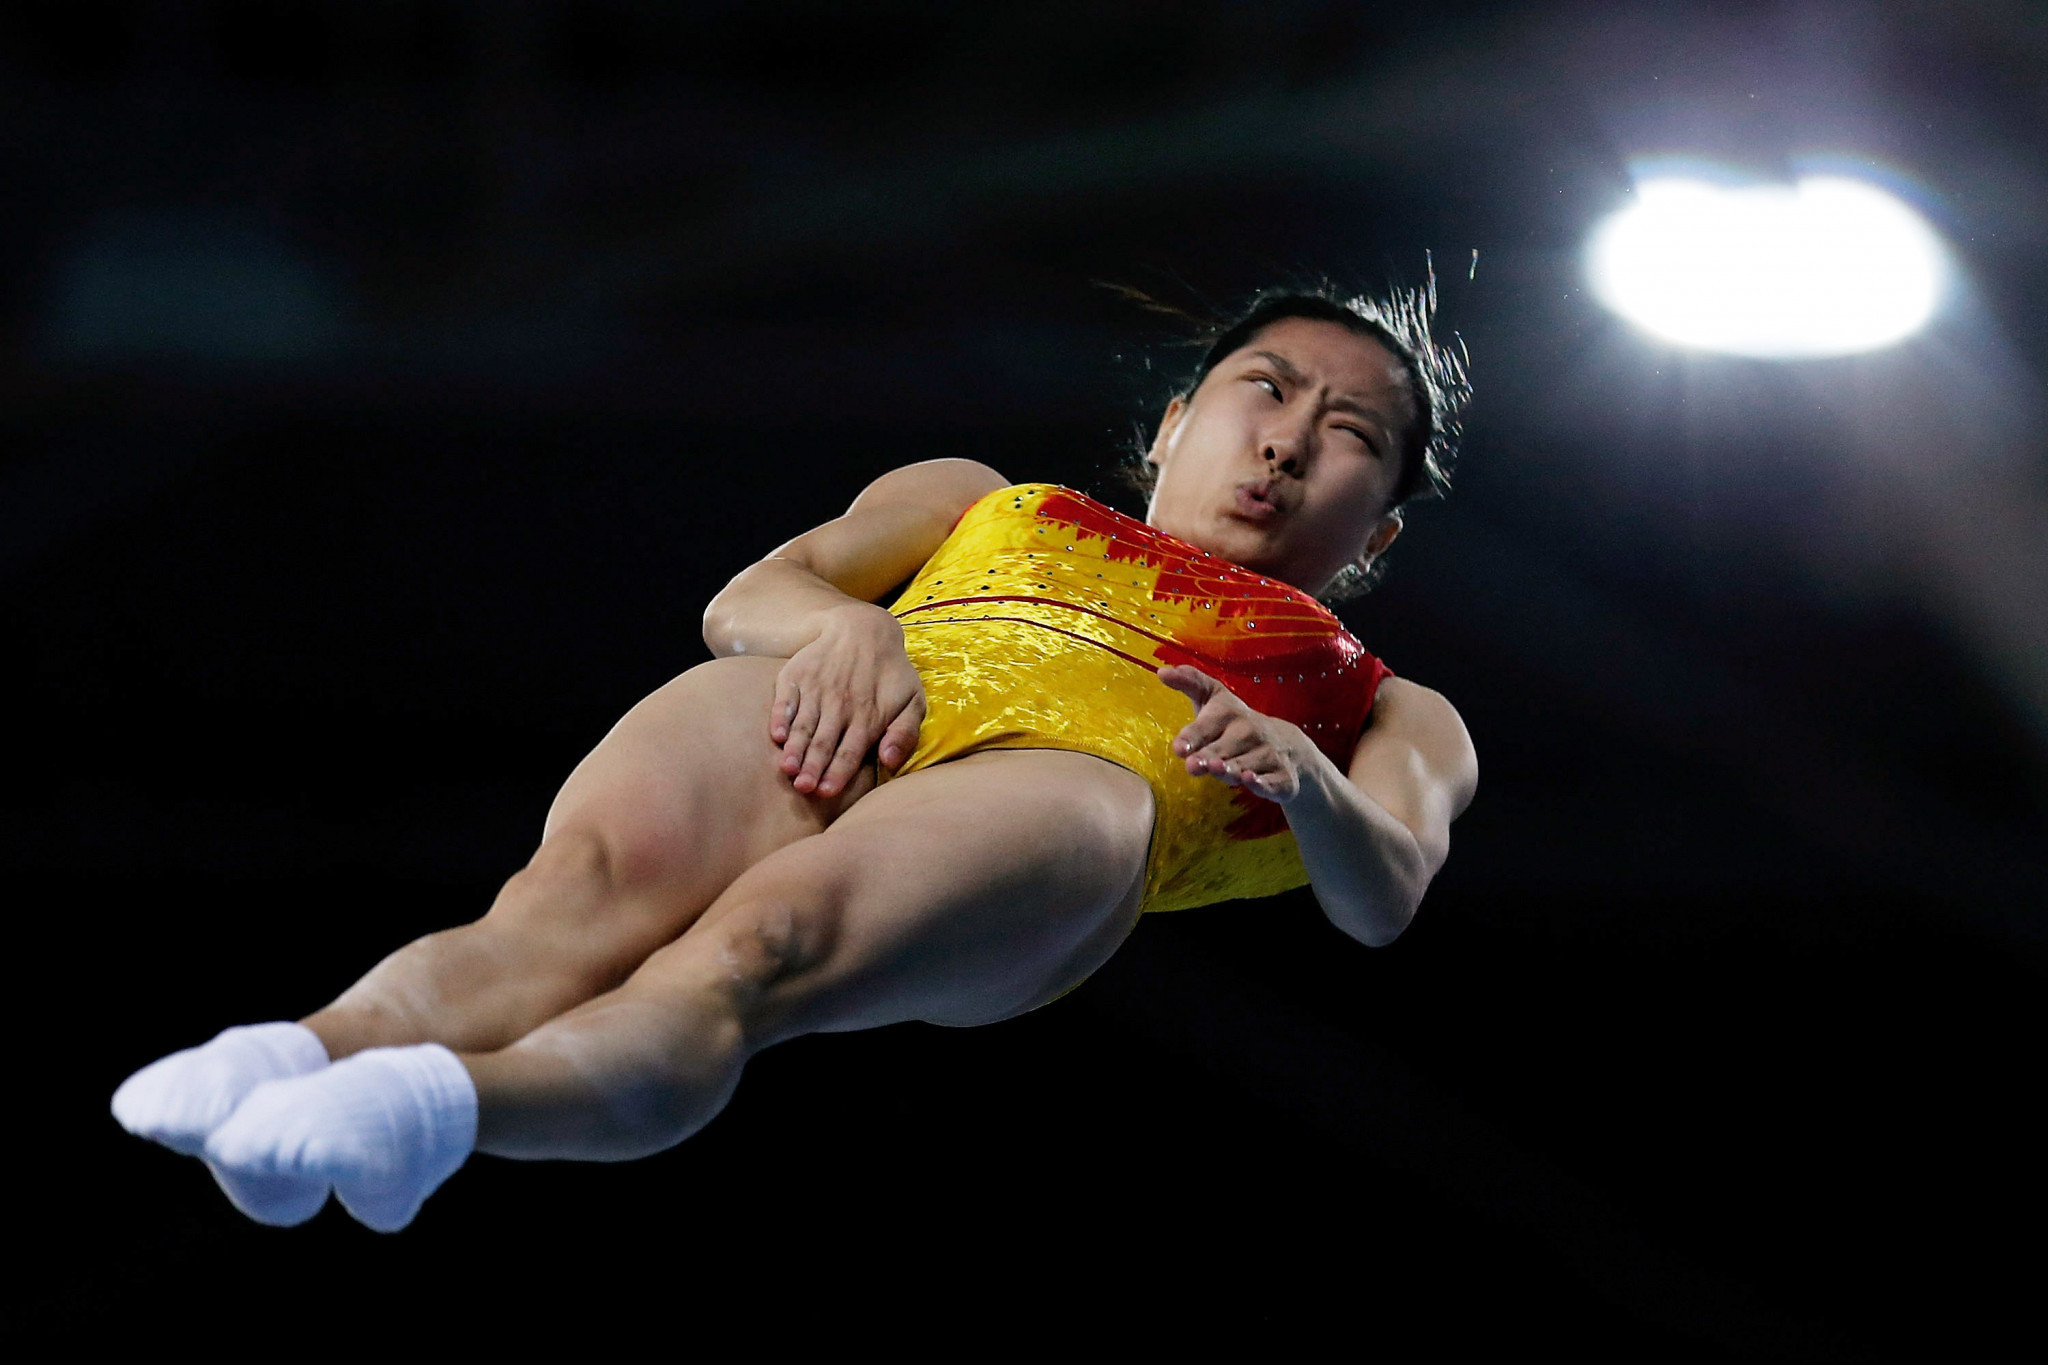 Li Dan will not compete in tomorrow's women's final after being the third placed Chinese athlete in qualifying ©Getty Images